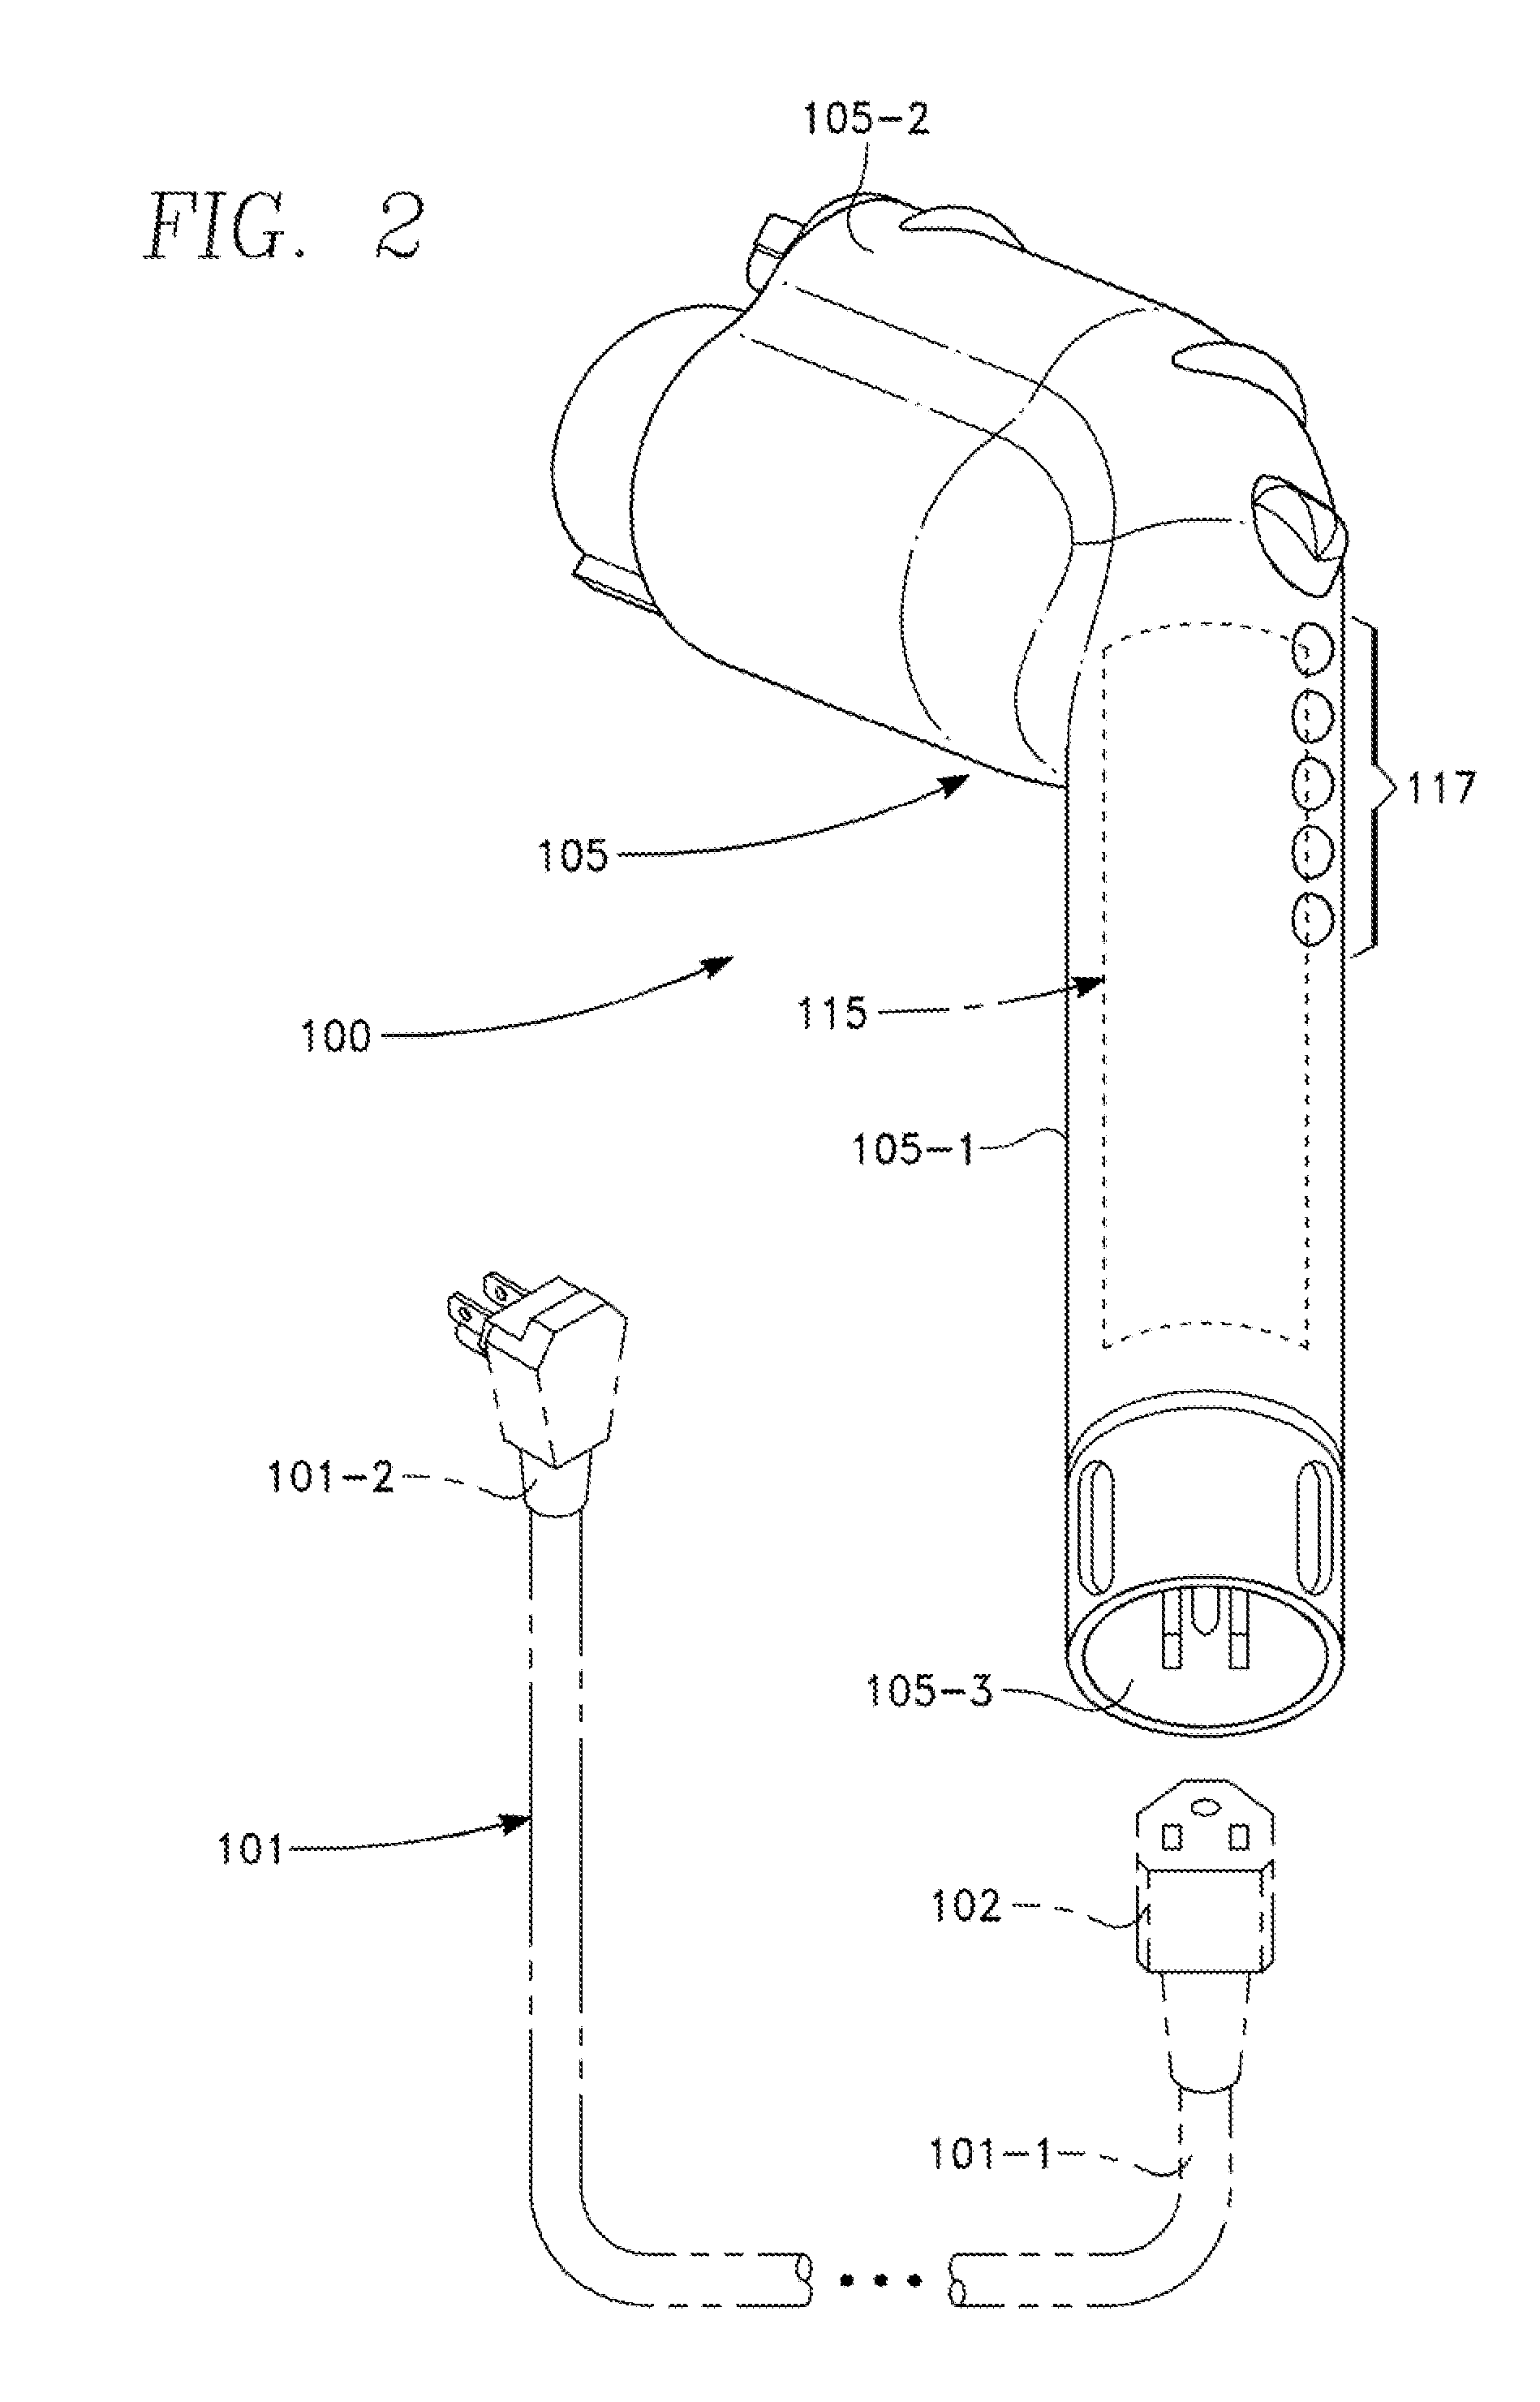 Electric vehicle docking connector with embedded evse controller